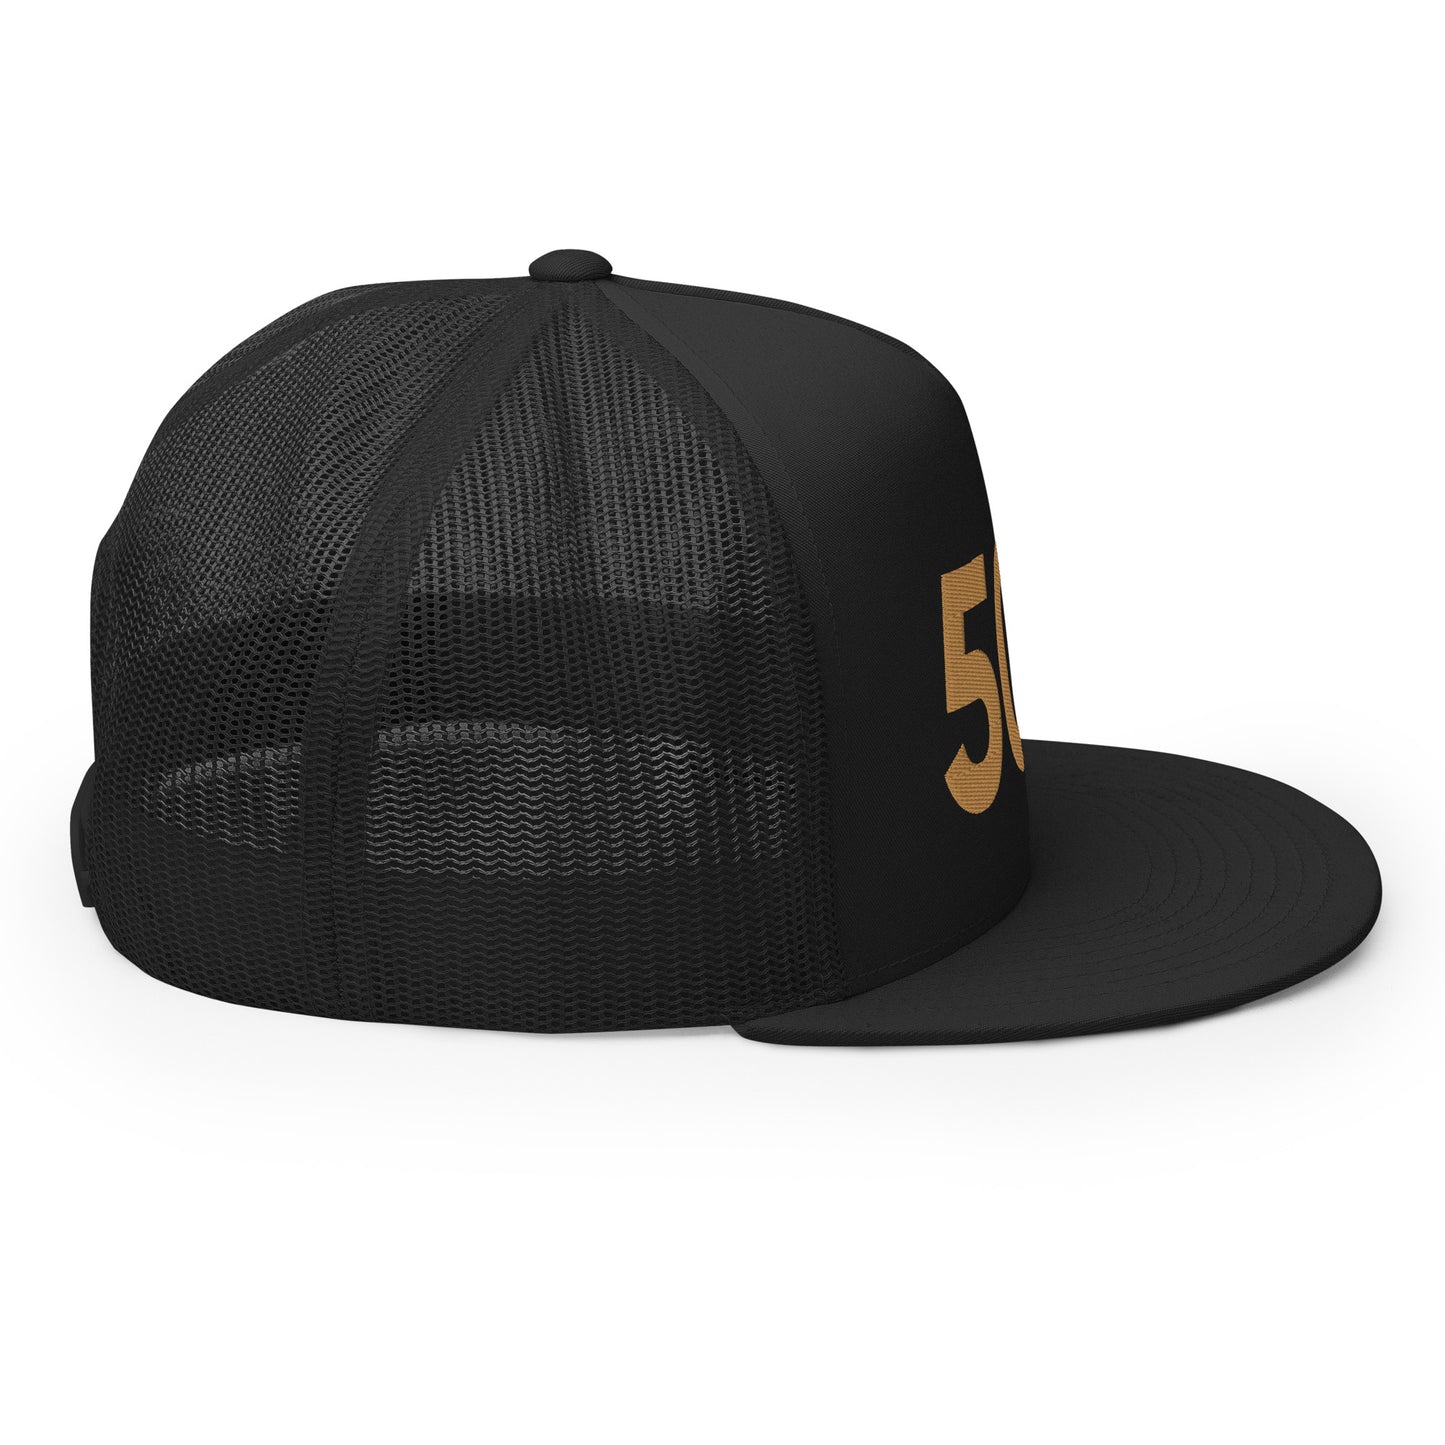 504 New Orleans Strong Trucker Hat